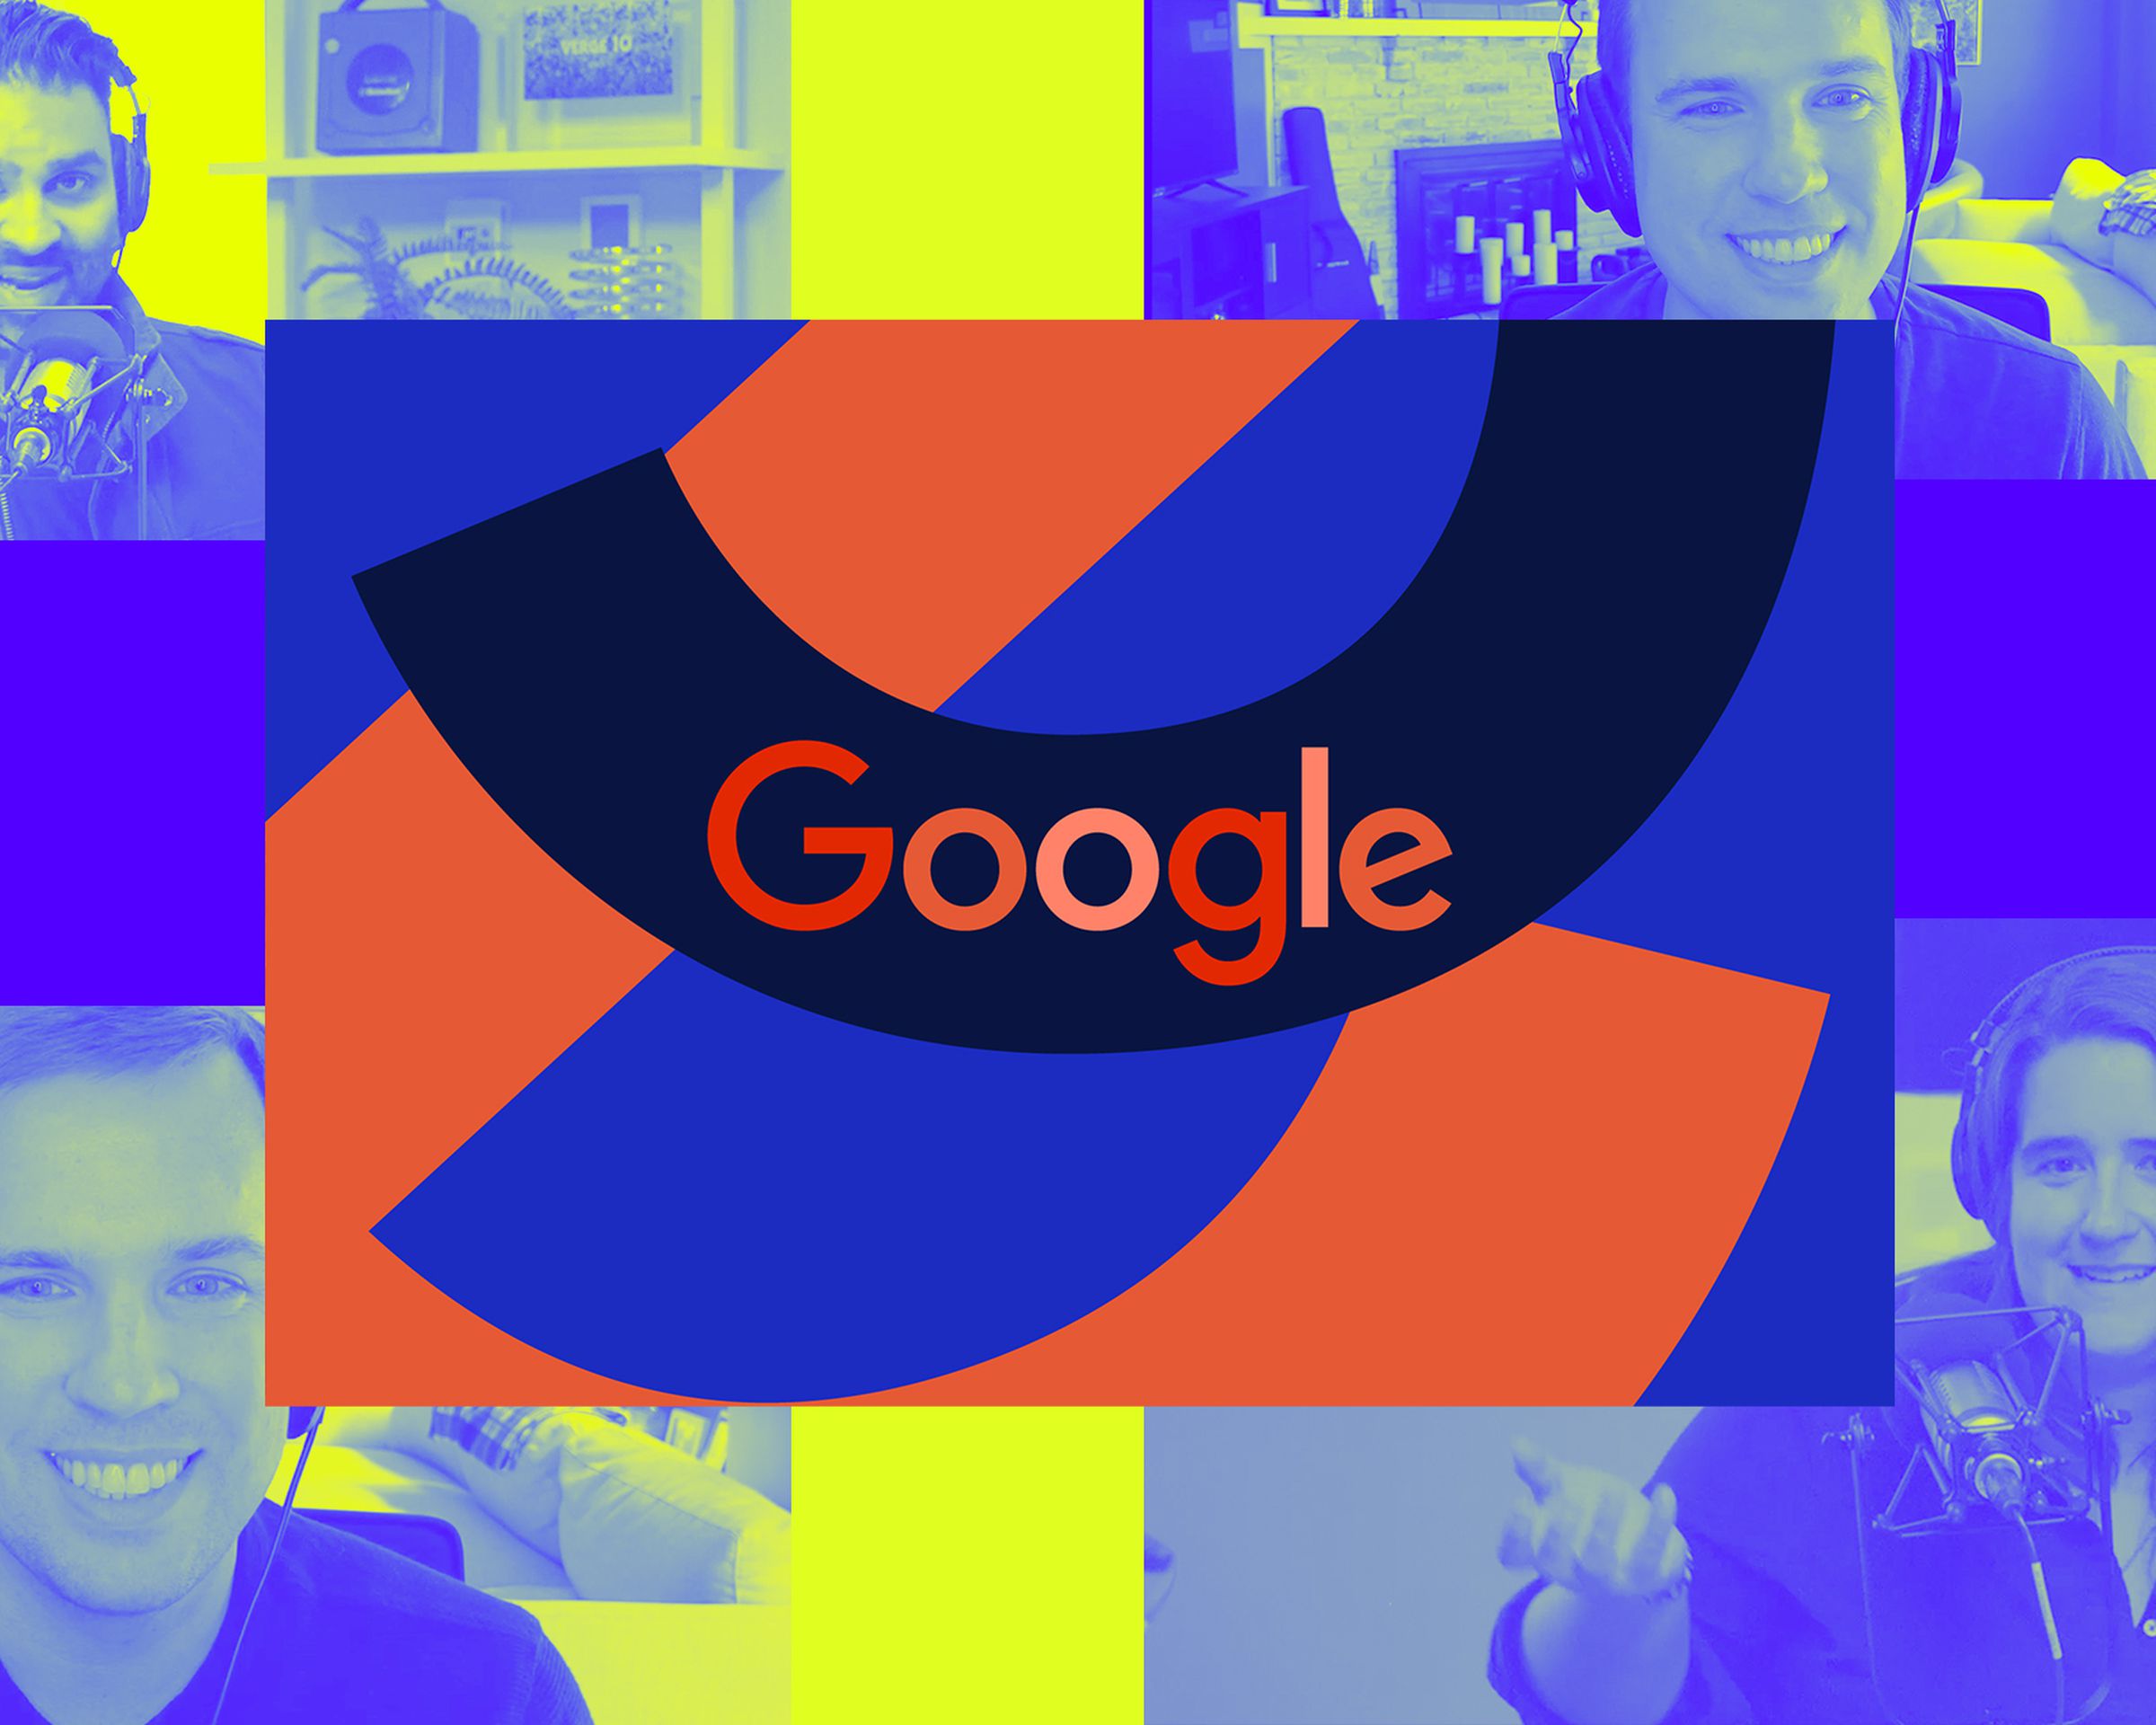 An image of the Google logo on top of a Vergecast illustration.